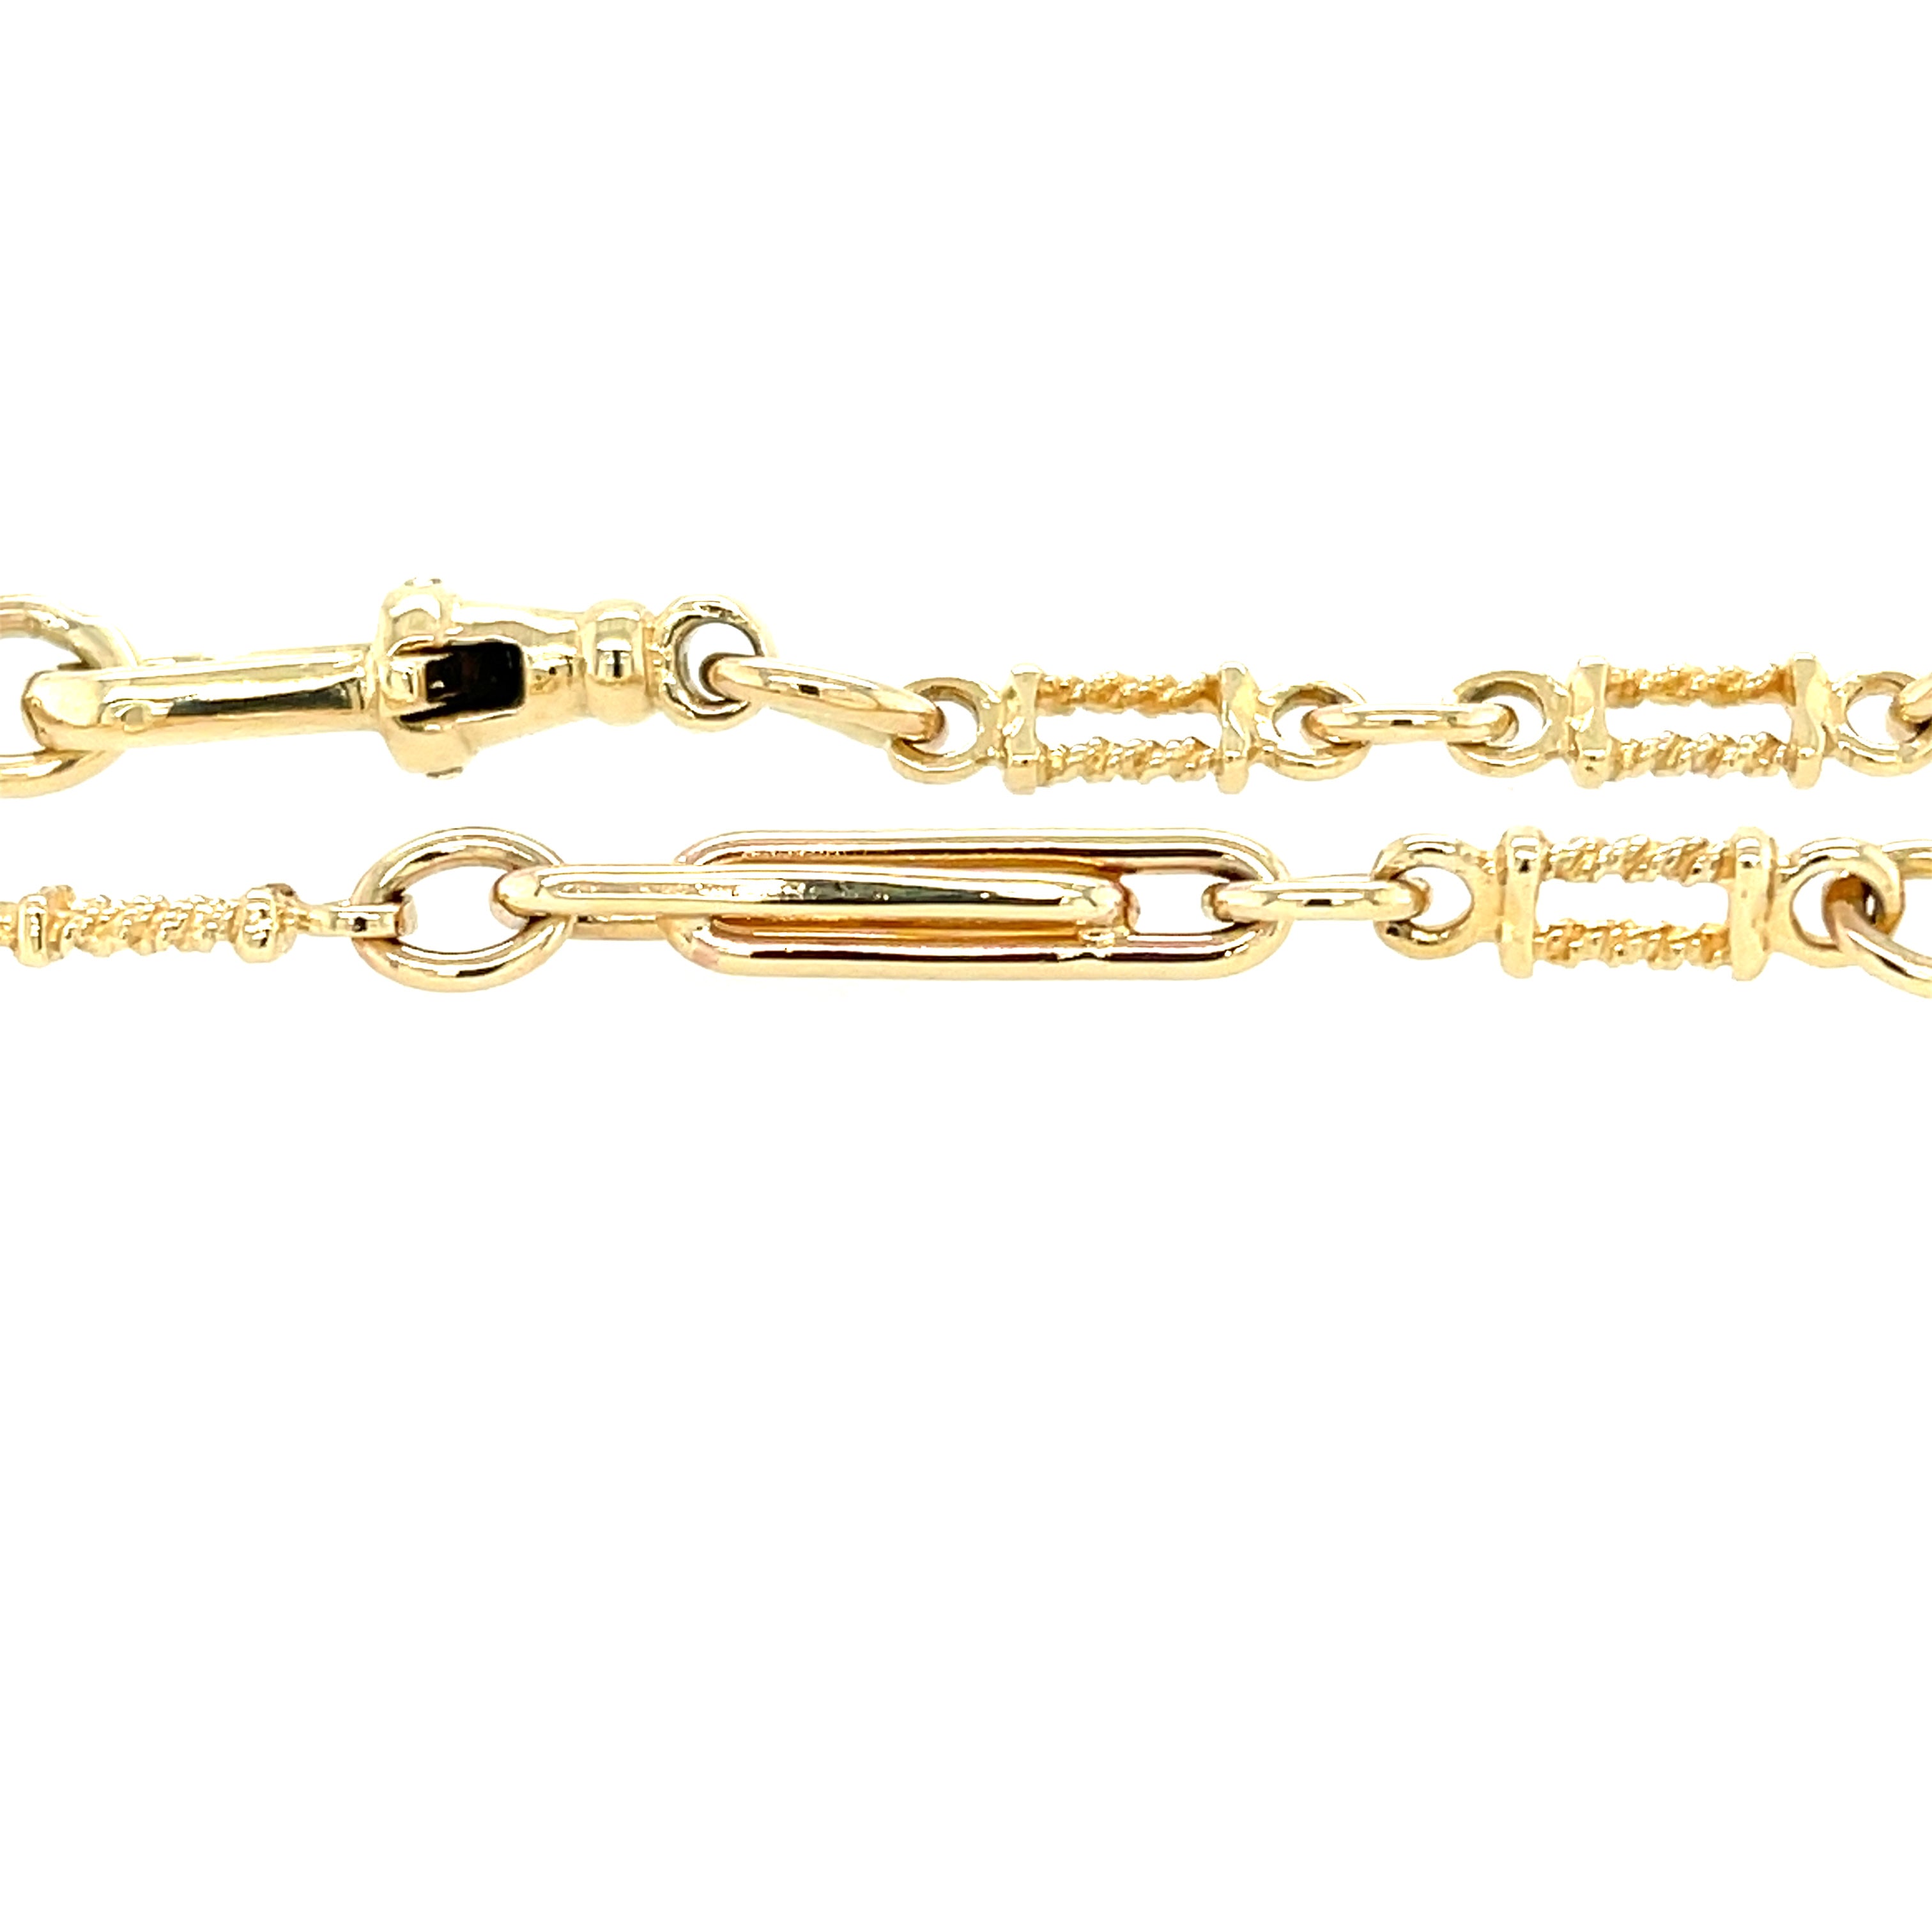 9ct Yellow Gold 8 Inch Fancy Mixed Link Bracelet - 8.80g